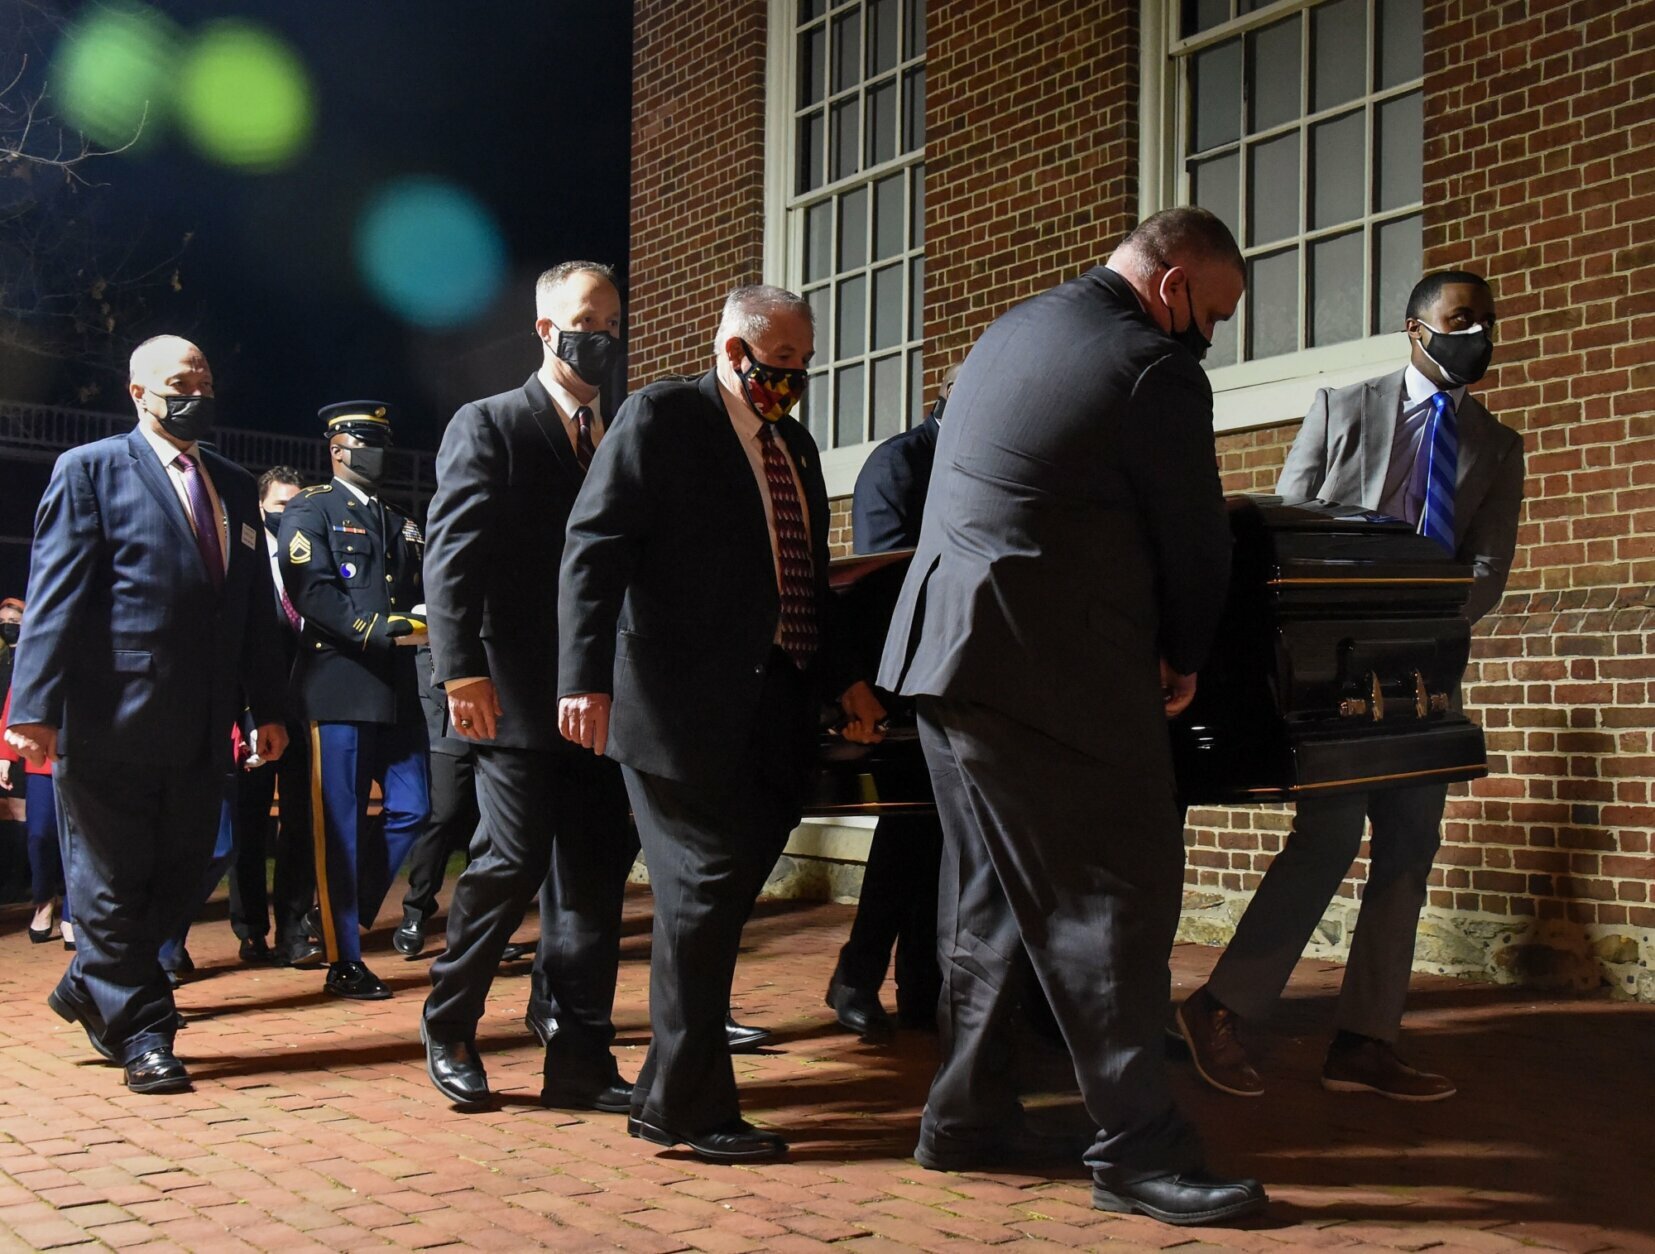 Former Maryland Senate President Thomas V. "Mike" Miller, who died following complications from cancer last week, is transported into the Maryland State House for a final viewing in Annapolis, Md., Thursday, Jan. 21, 2021. (Ulysses Muñoz/The Baltimore Sun via AP, Pool)